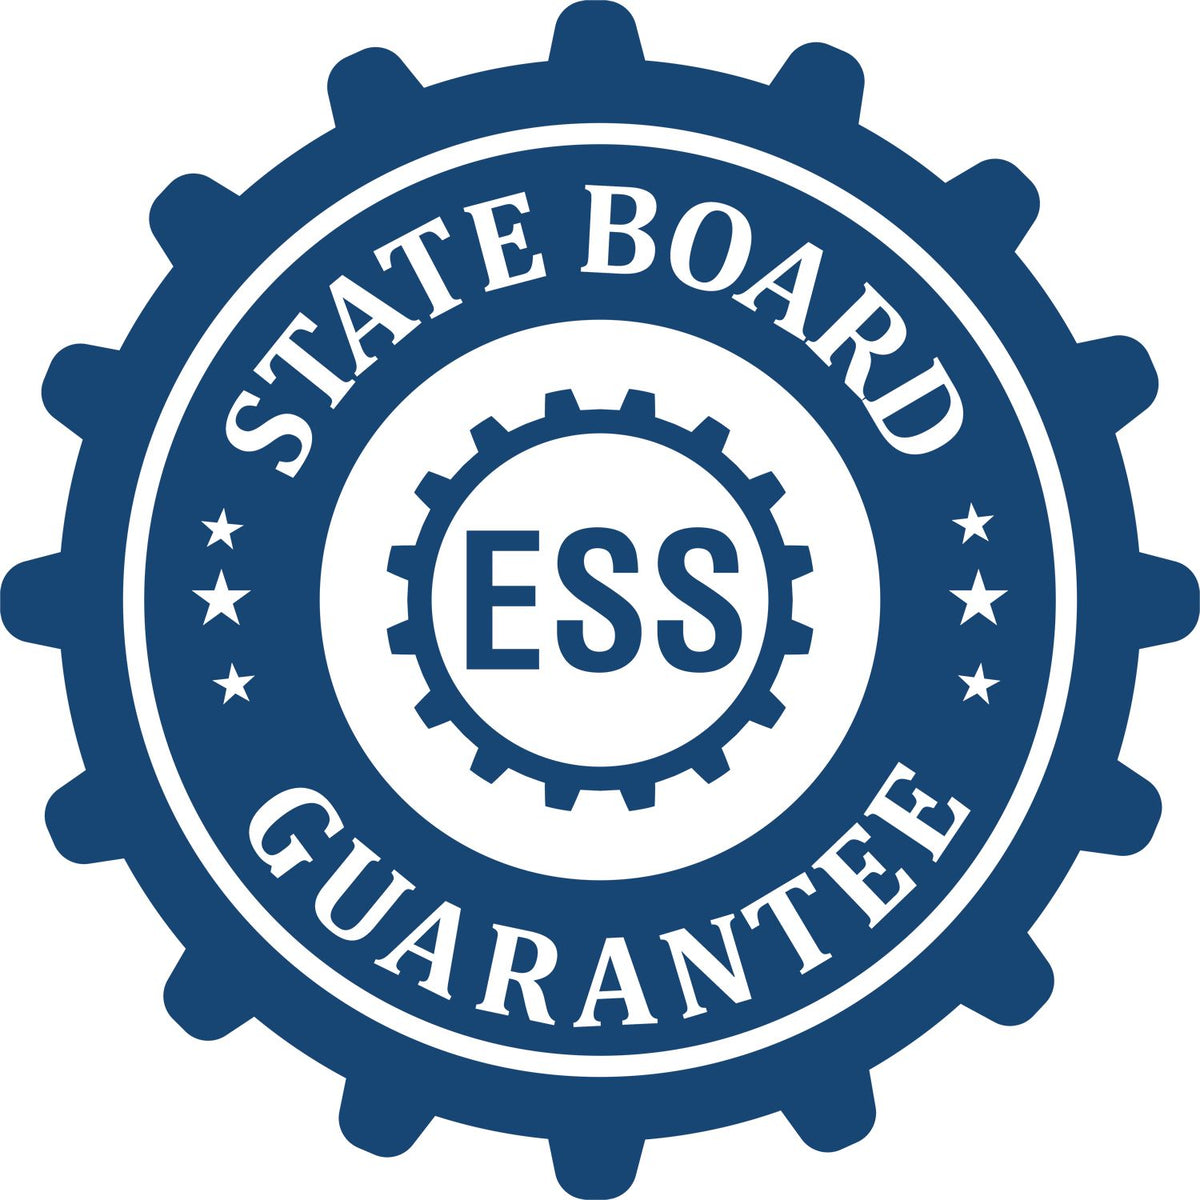 An emblem in a gear shape illustrating a state board guarantee for the Arkansas Geologist Desk Seal